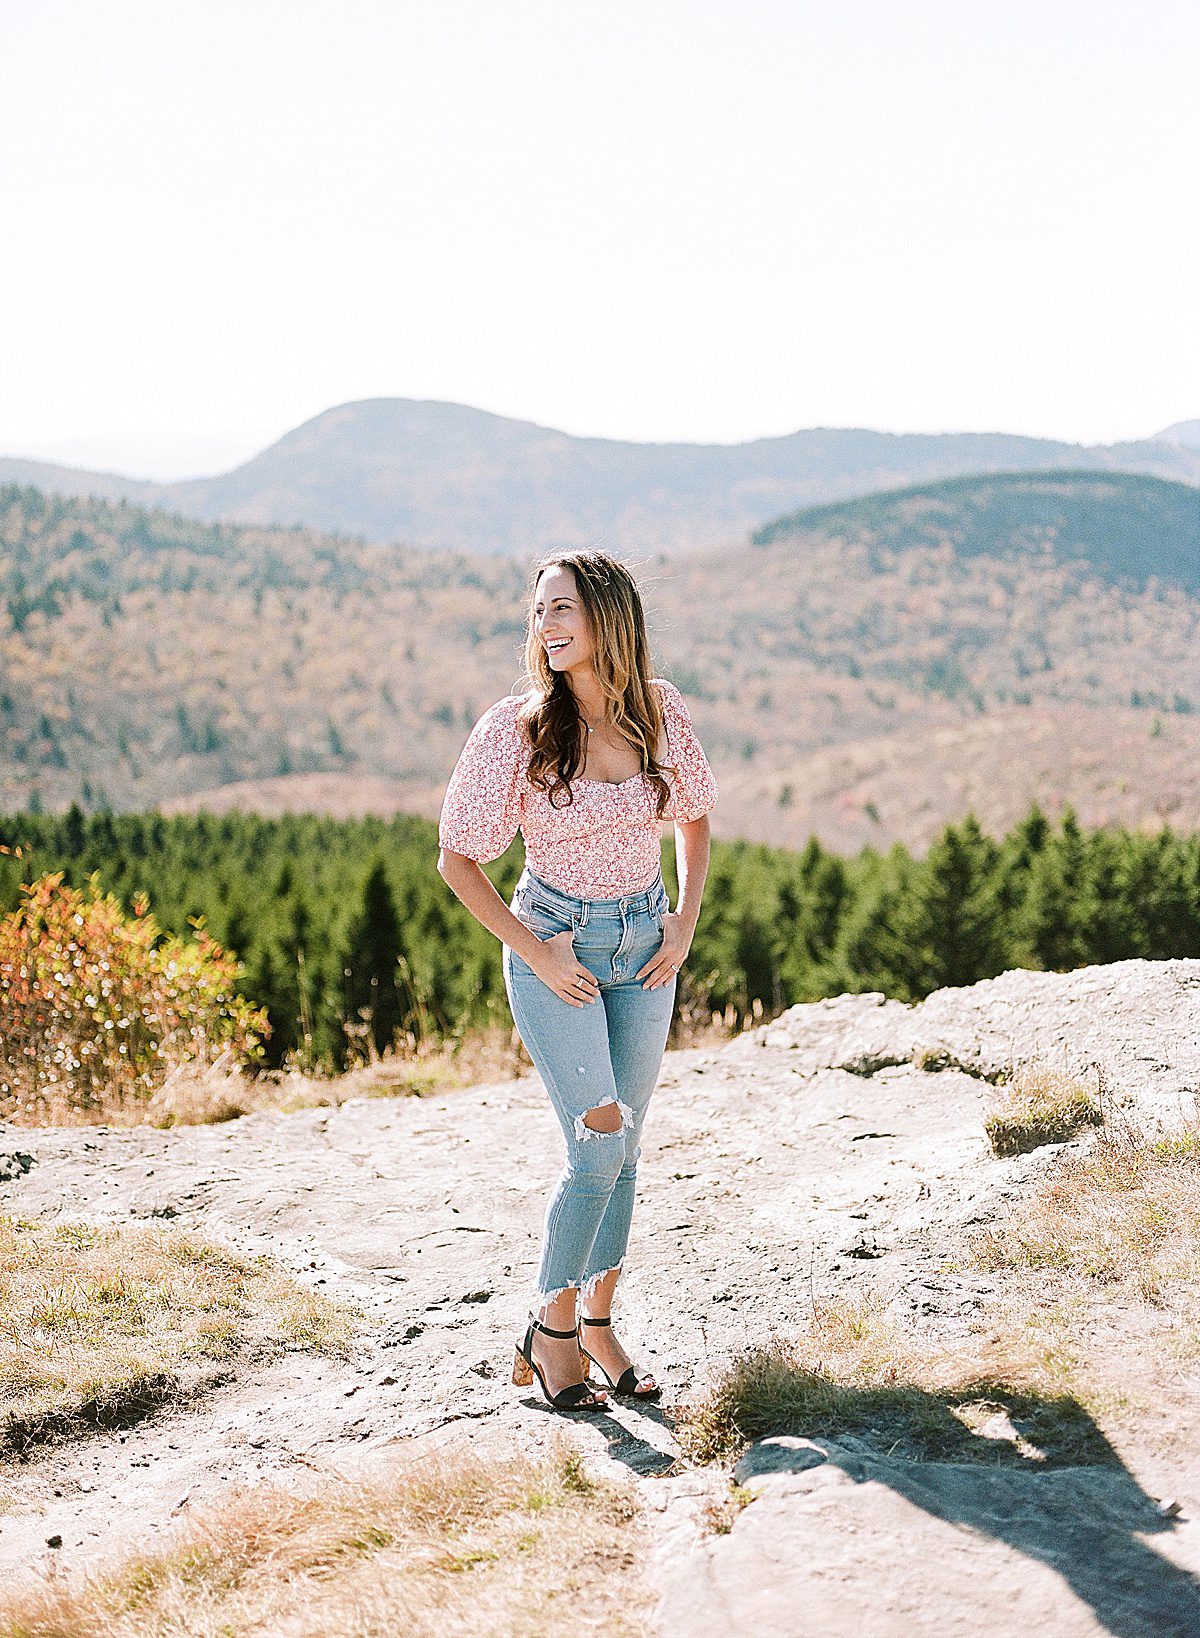 Gorgeous Gal Laughing in Mountains Photo